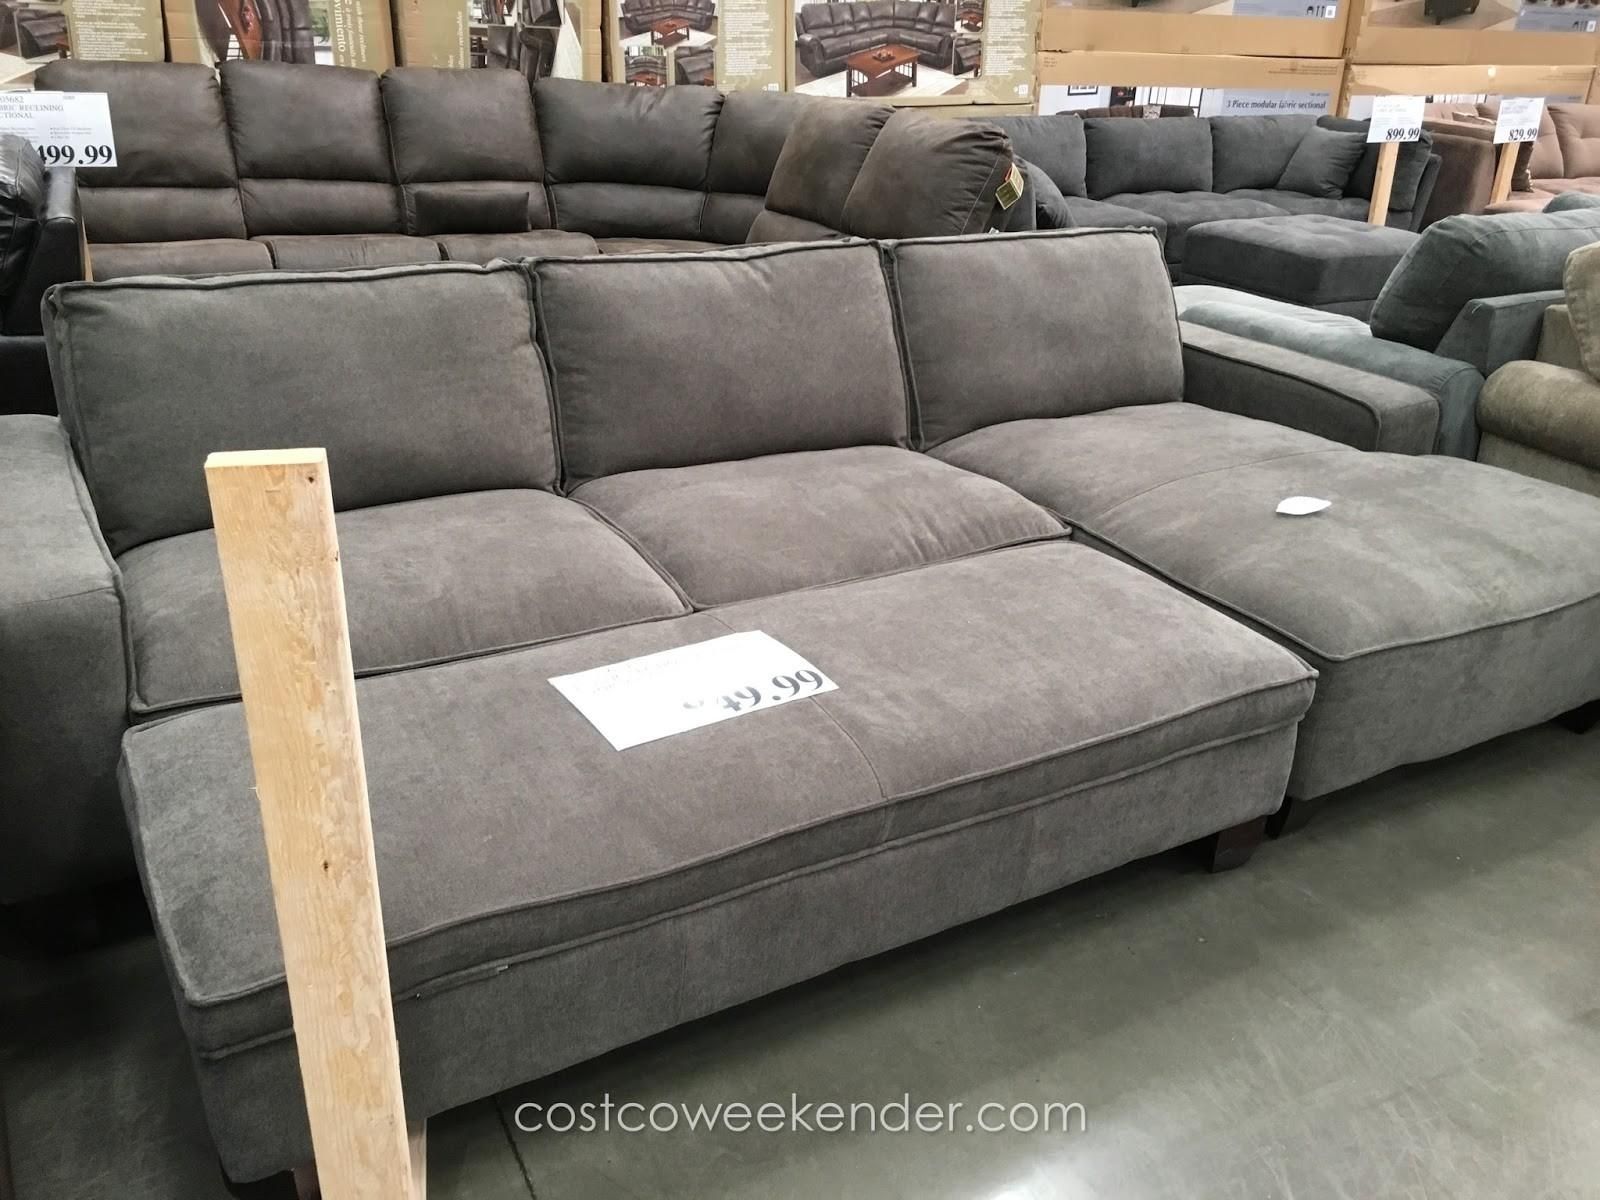 Furniture : Sectional Couch Costco Lovely Trends Costco Sectional Pertaining To Victoria Bc Sectional Sofas (View 4 of 10)